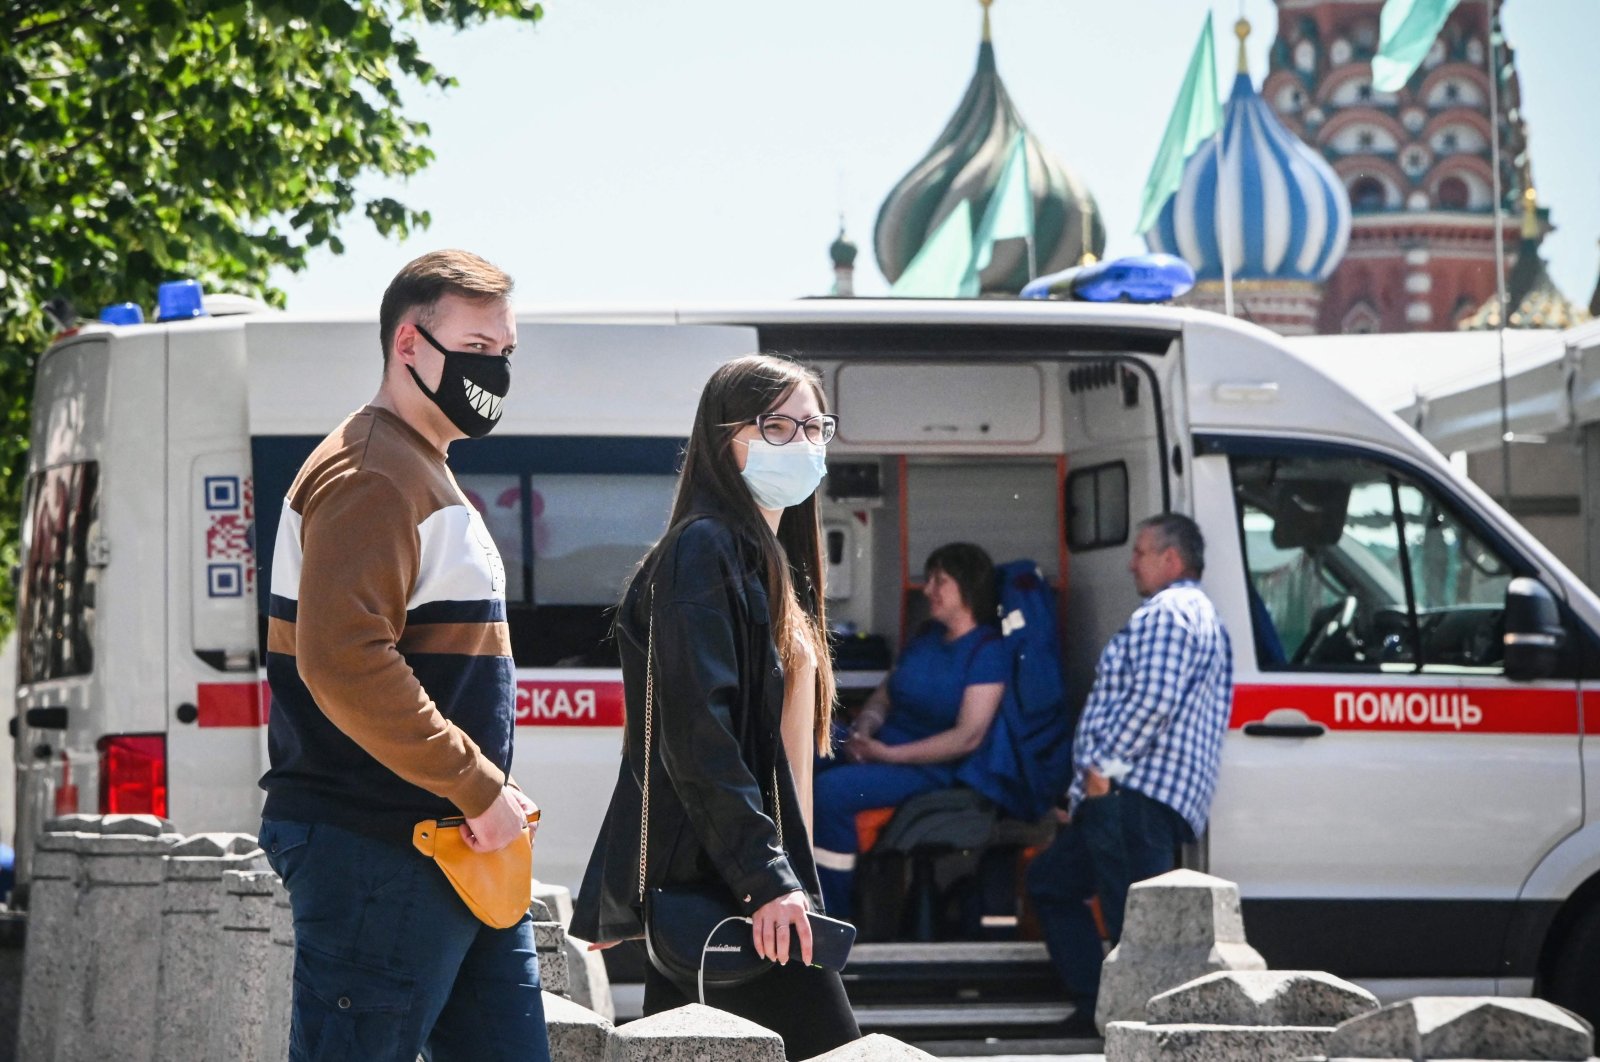 People wearing face masks walk along Red Square in front of St. Basil's cathedral in central passing an ambulance amid the crisis linked with the COVID-19 pandemic caused by the novel coronavirus, Moscow, Russia, June 18, 2021. (AFP Photo)